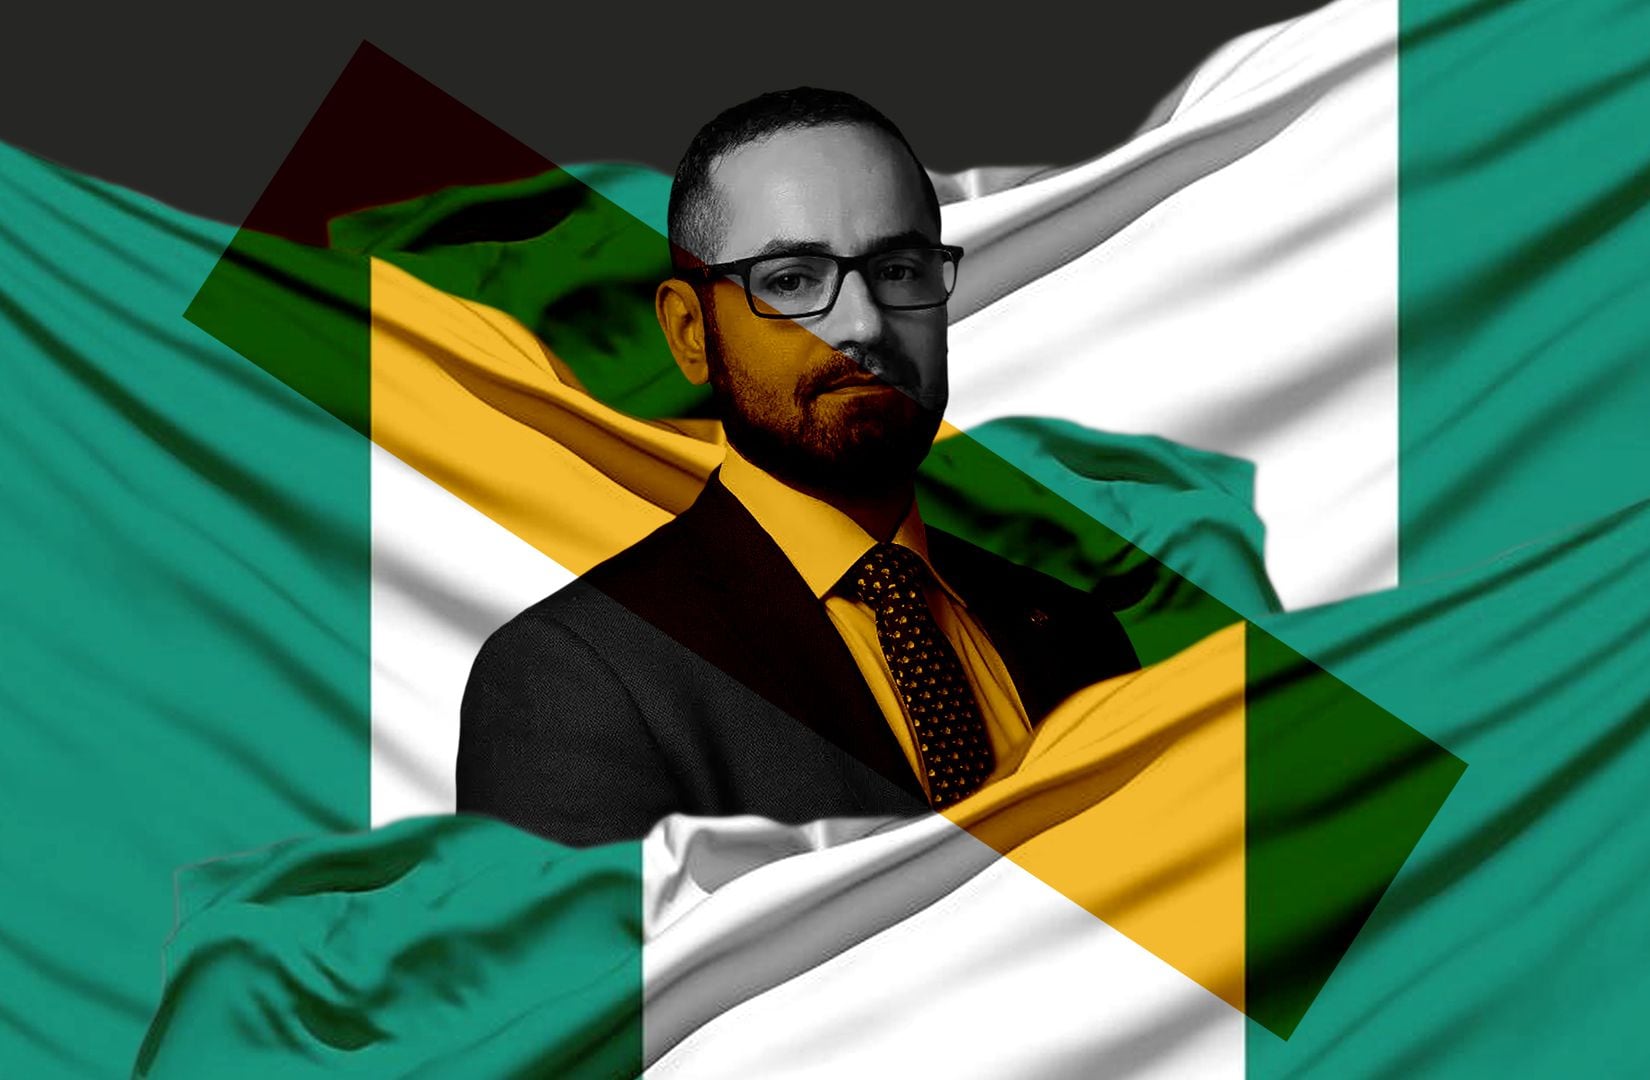 A jailed Binance exec, a $35m money laundering case, and an Interpol manhunt — how Nigeria’s crypto crisis unfolded